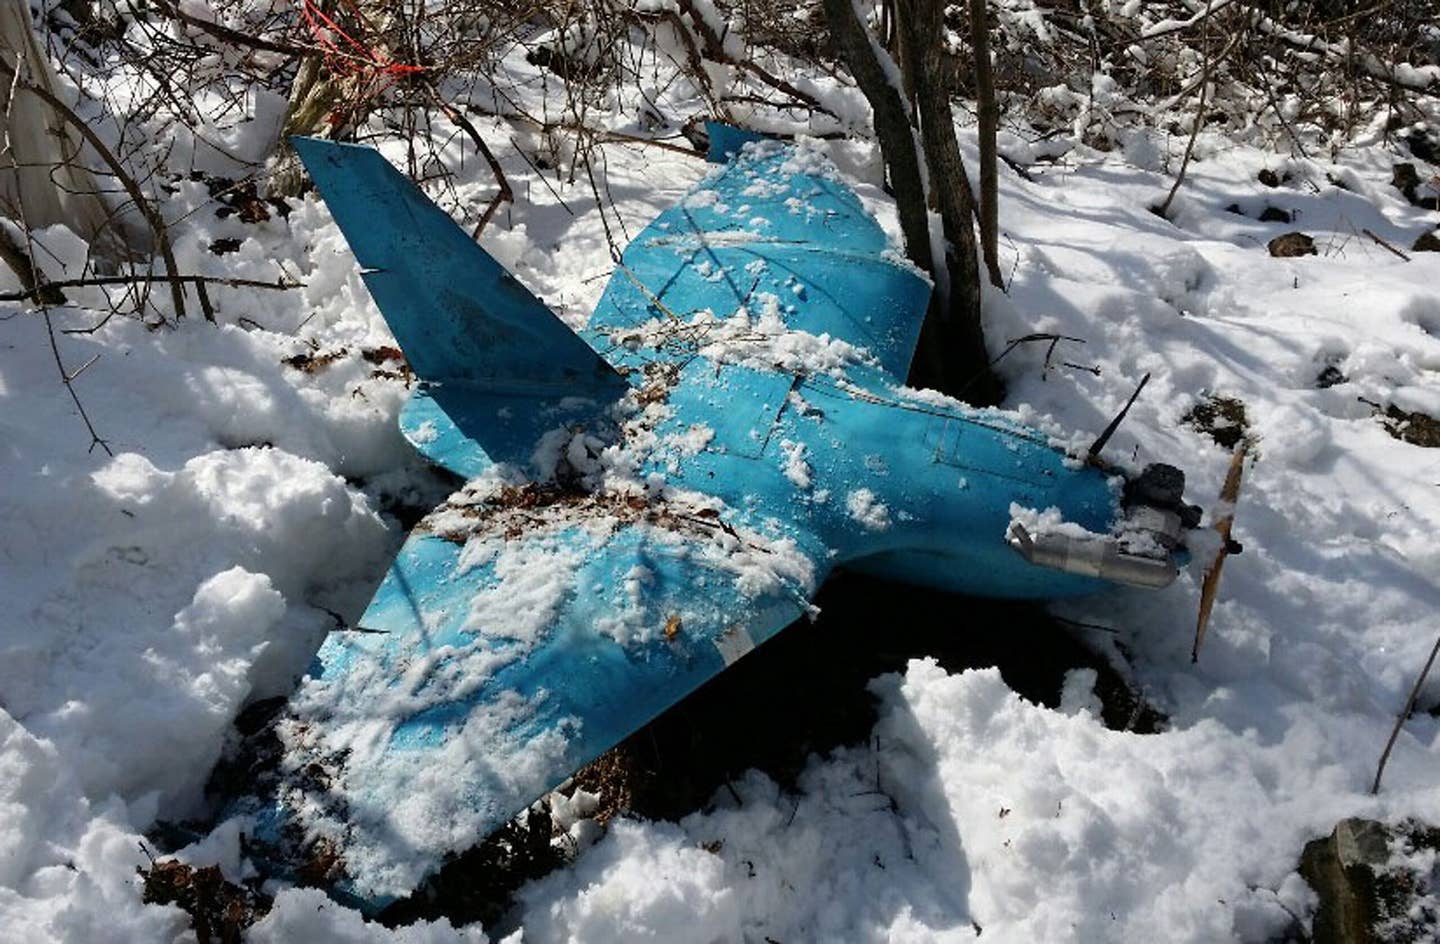 The wreckage of a crashed North Korean drone seen on a mountain in Samcheok, South Korea, back April 2014. This was one of three such drones found in South Korea around that period. <em>Photo by Handout/South Korean Defence Ministry via Getty Images</em>